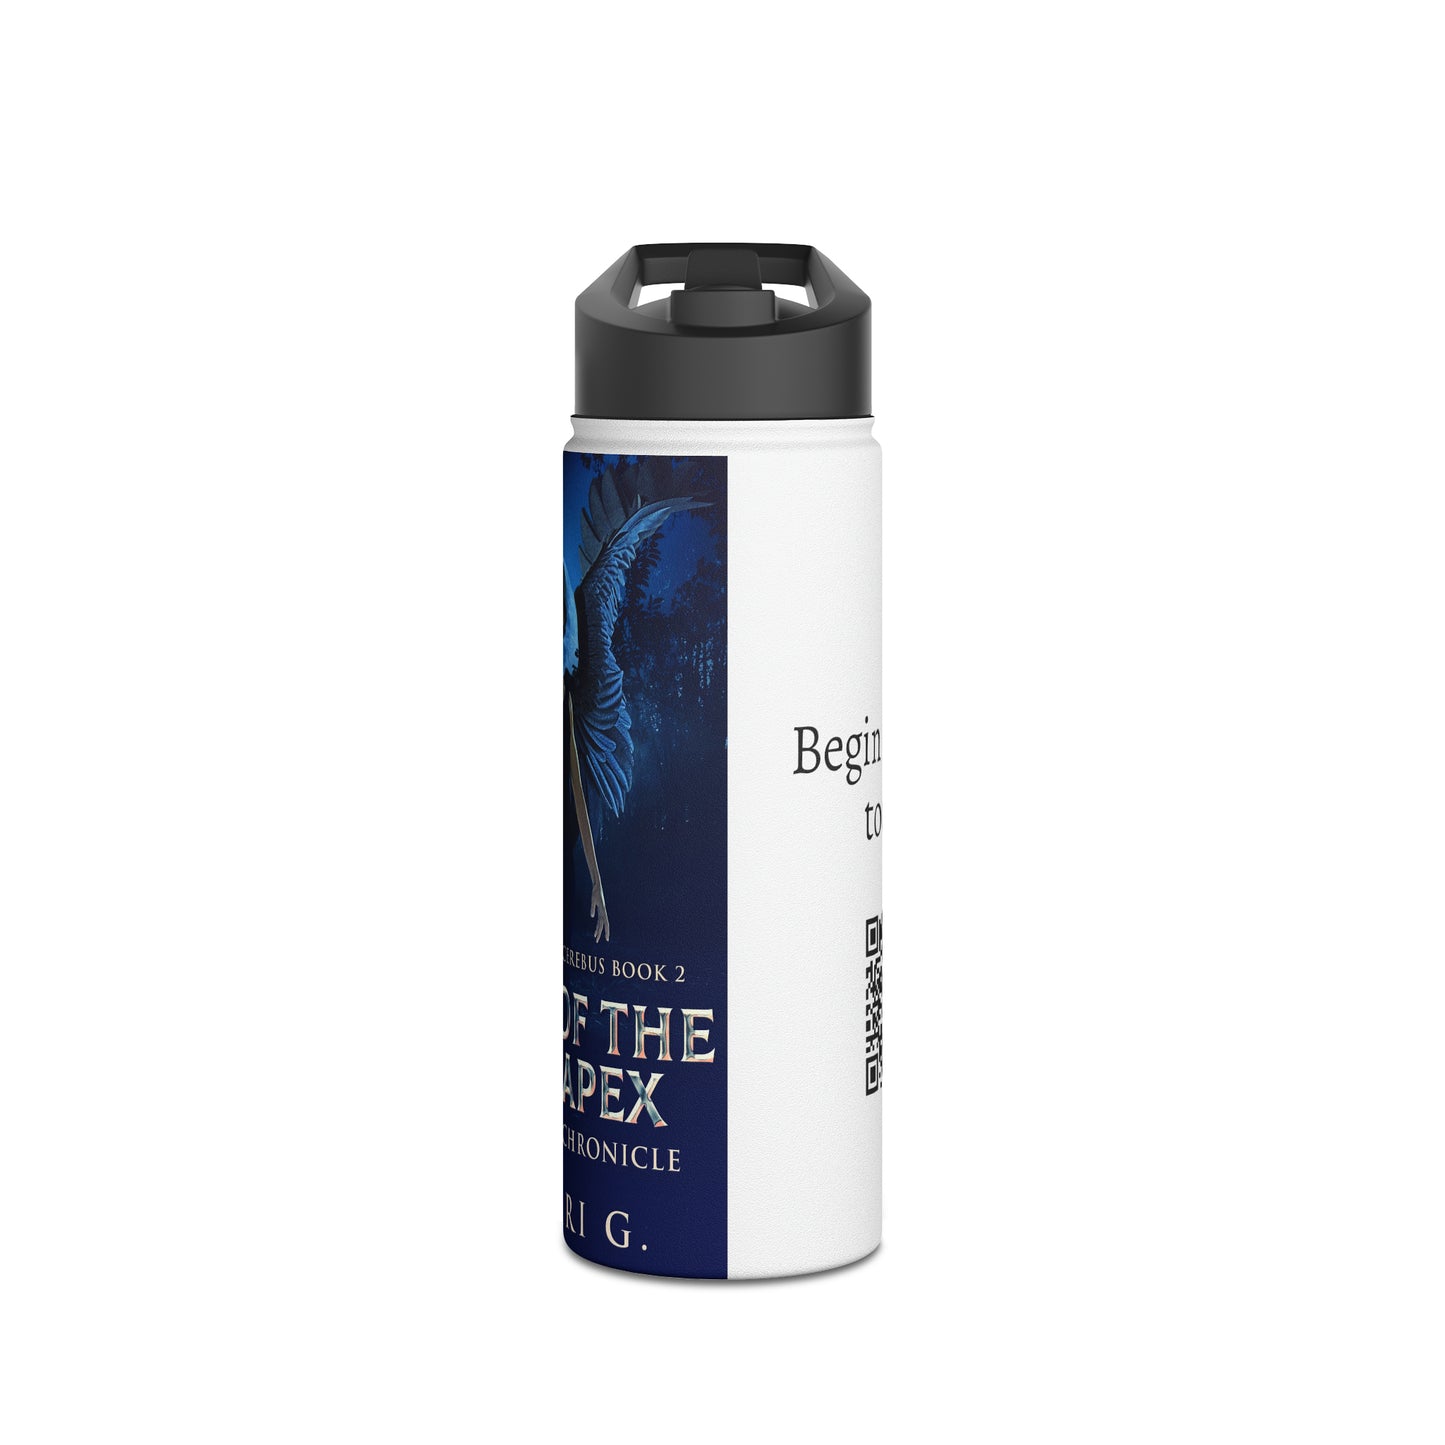 Dawn Of The Dual Apex - Stainless Steel Water Bottle